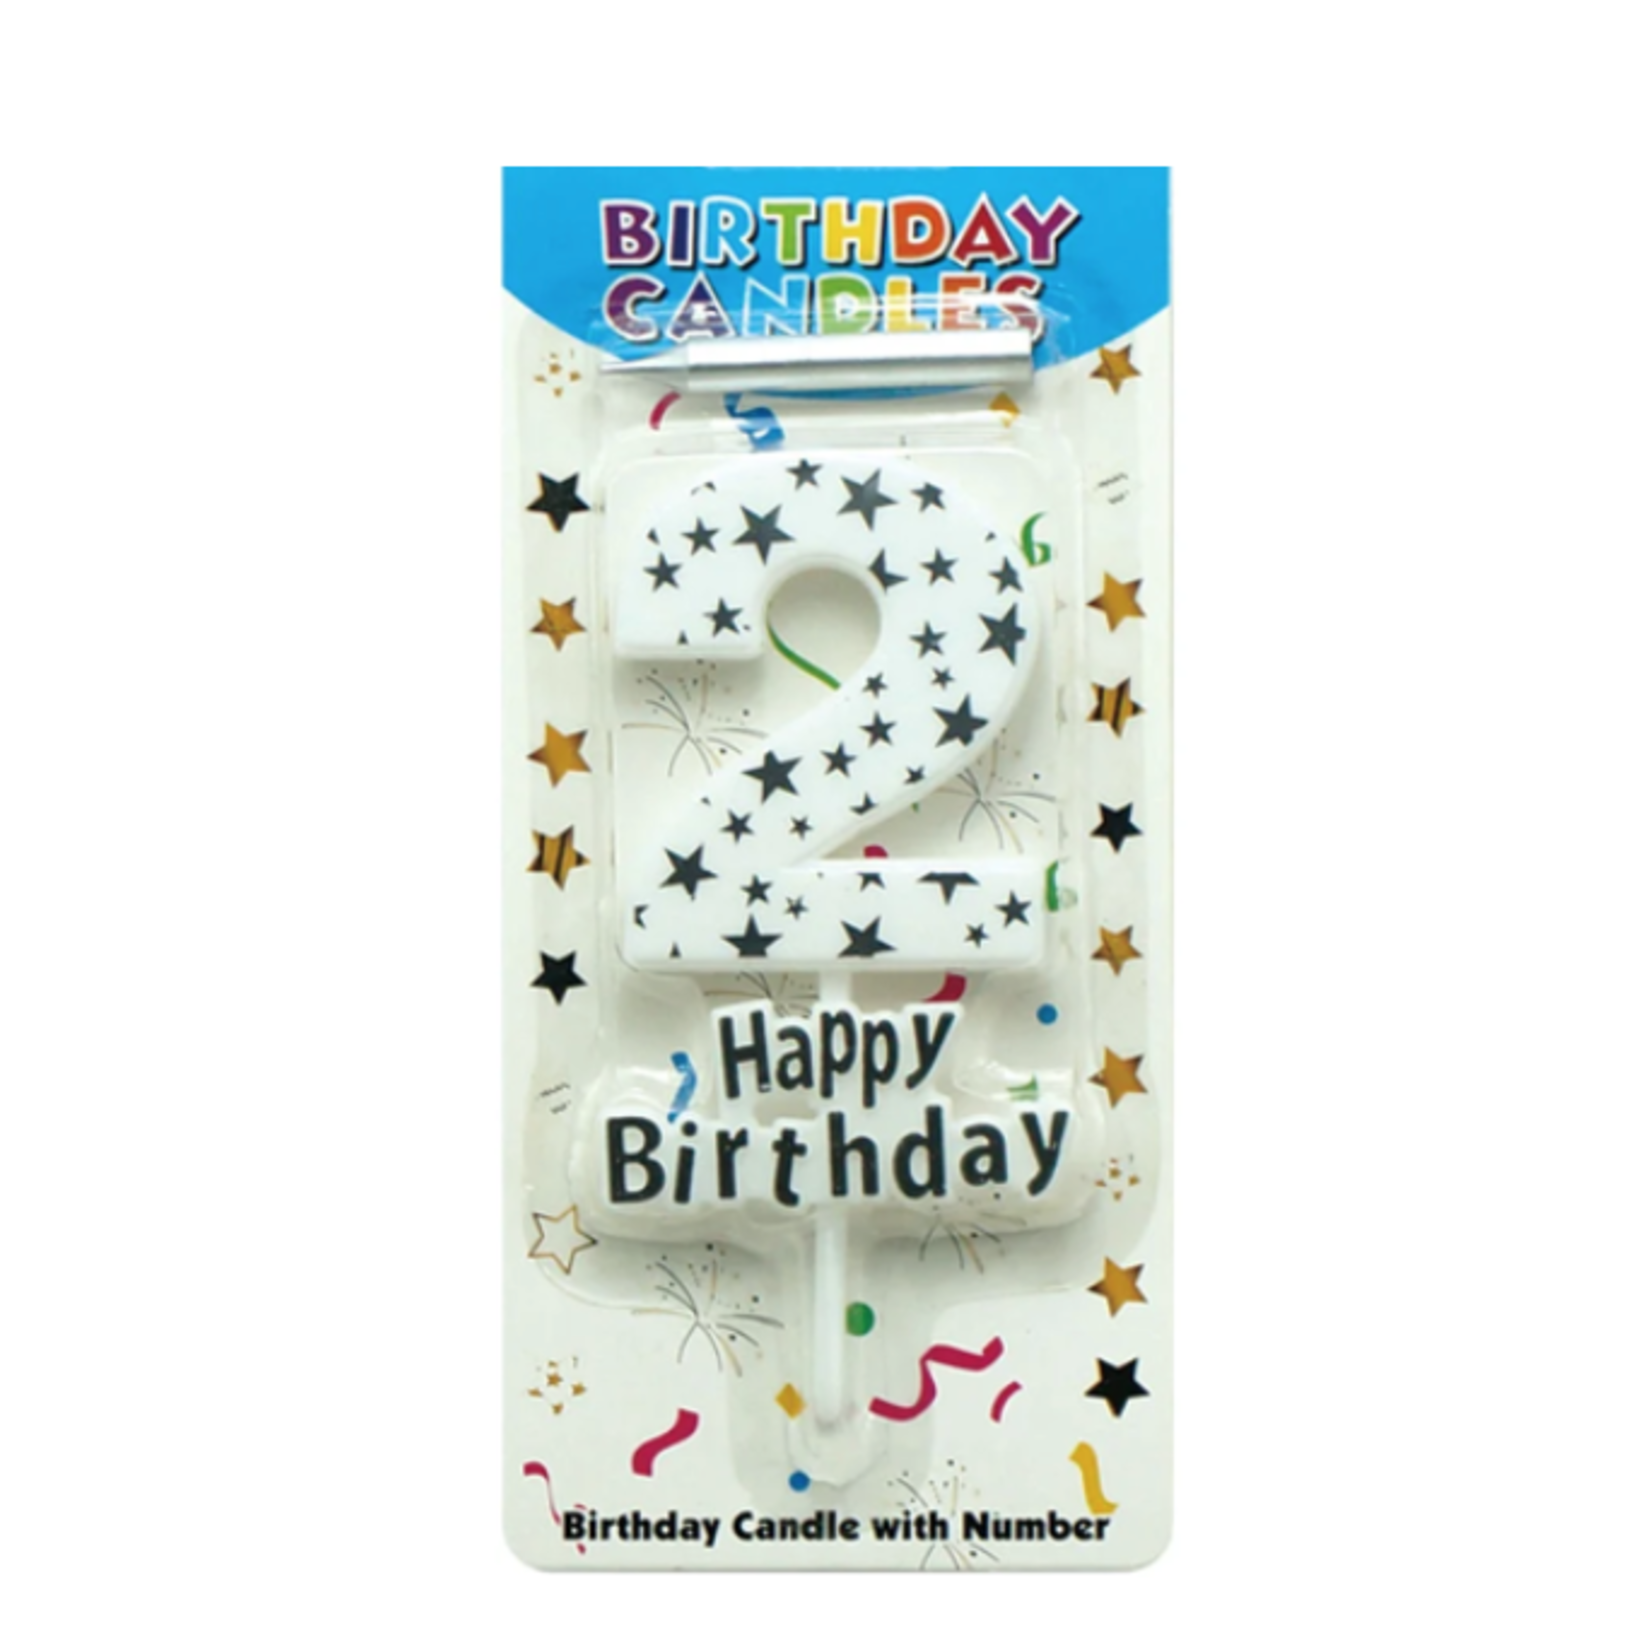 BIRTHDAY CANDLE #2 WHITE WITH SILVER STARS